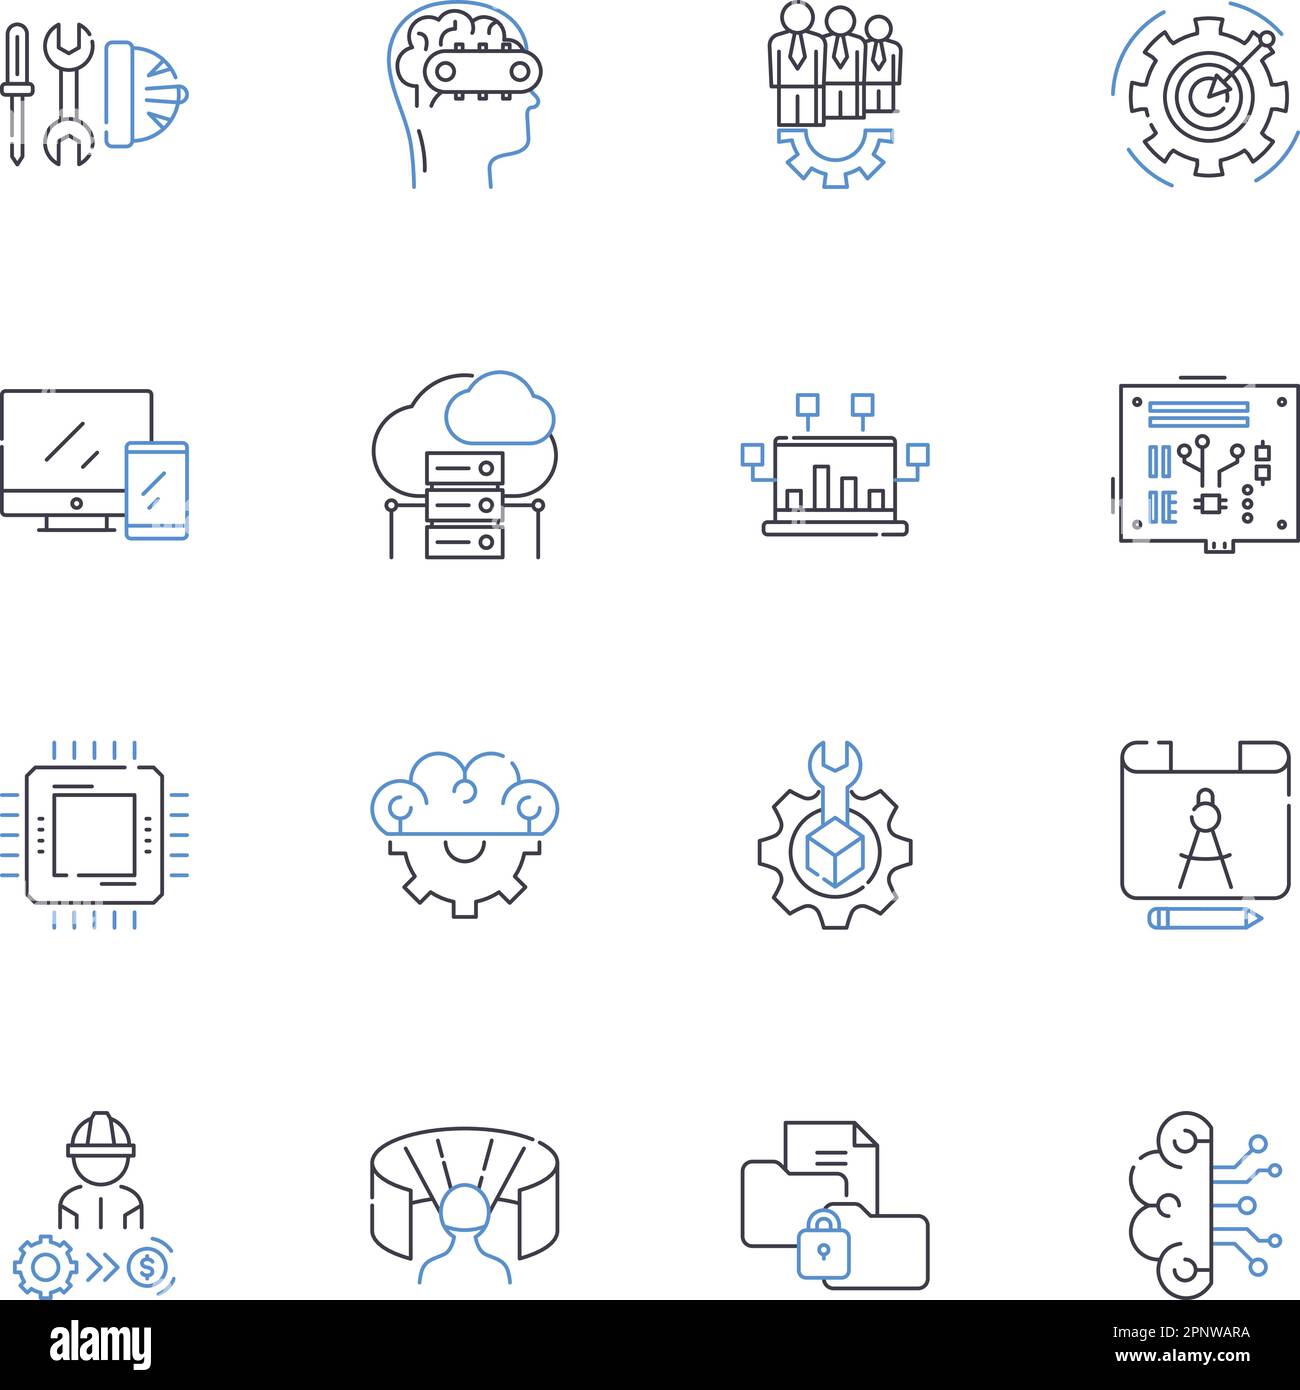 Watching observing line icons collection. Gazing, Observing, Scanning, Seeing, Watching, Peering, Staring vector and linear illustration. Glimpsing Stock Vector